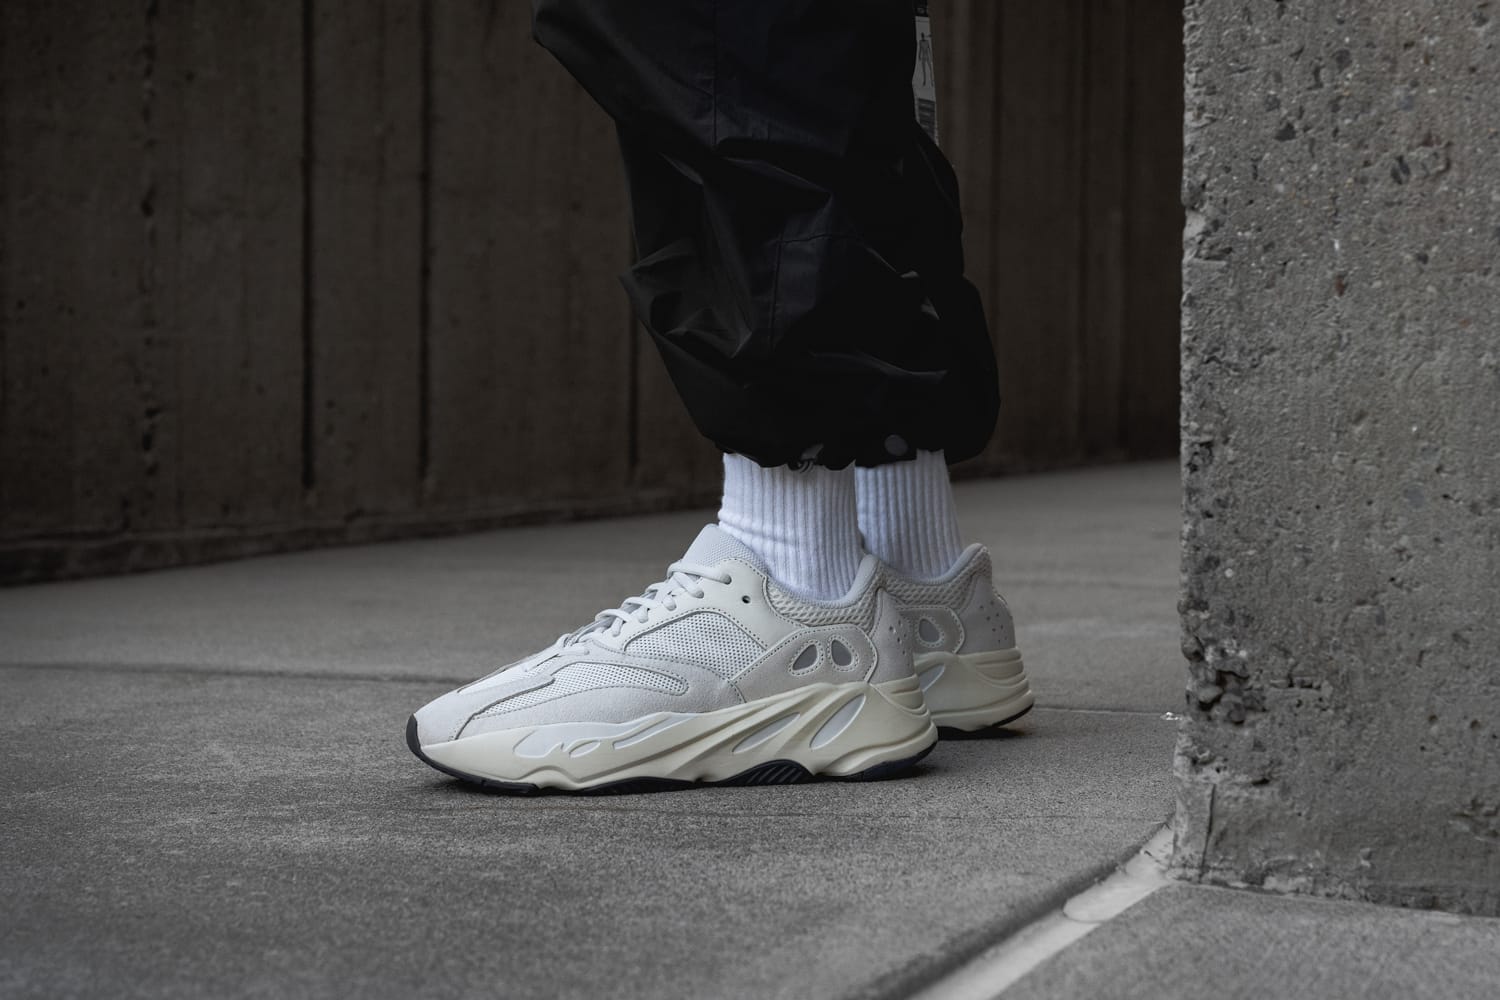 yeezy 700 analog review